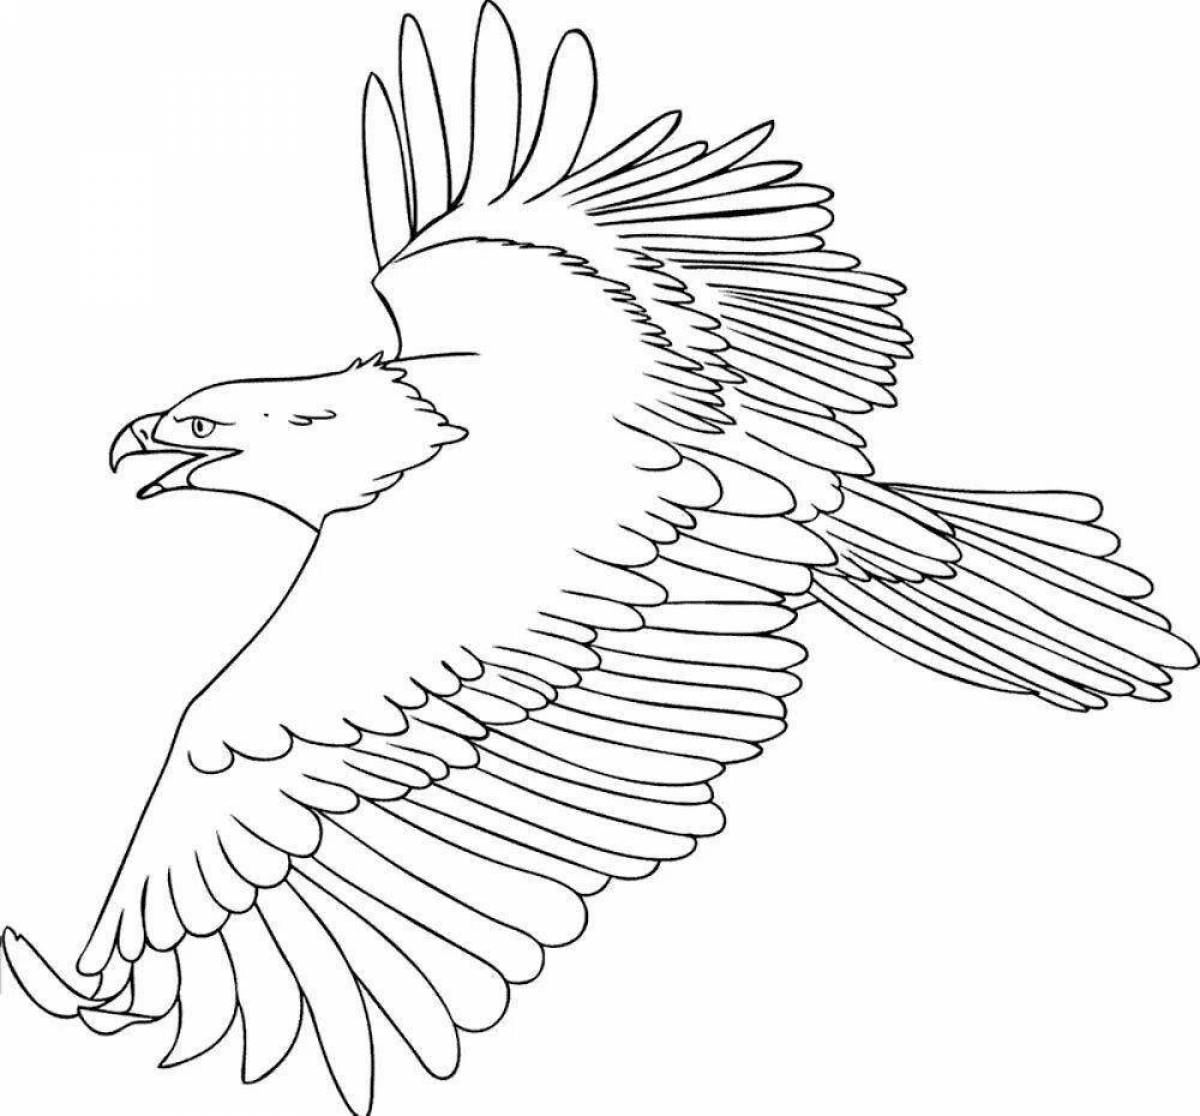 Exquisite eagle coloring book for kids